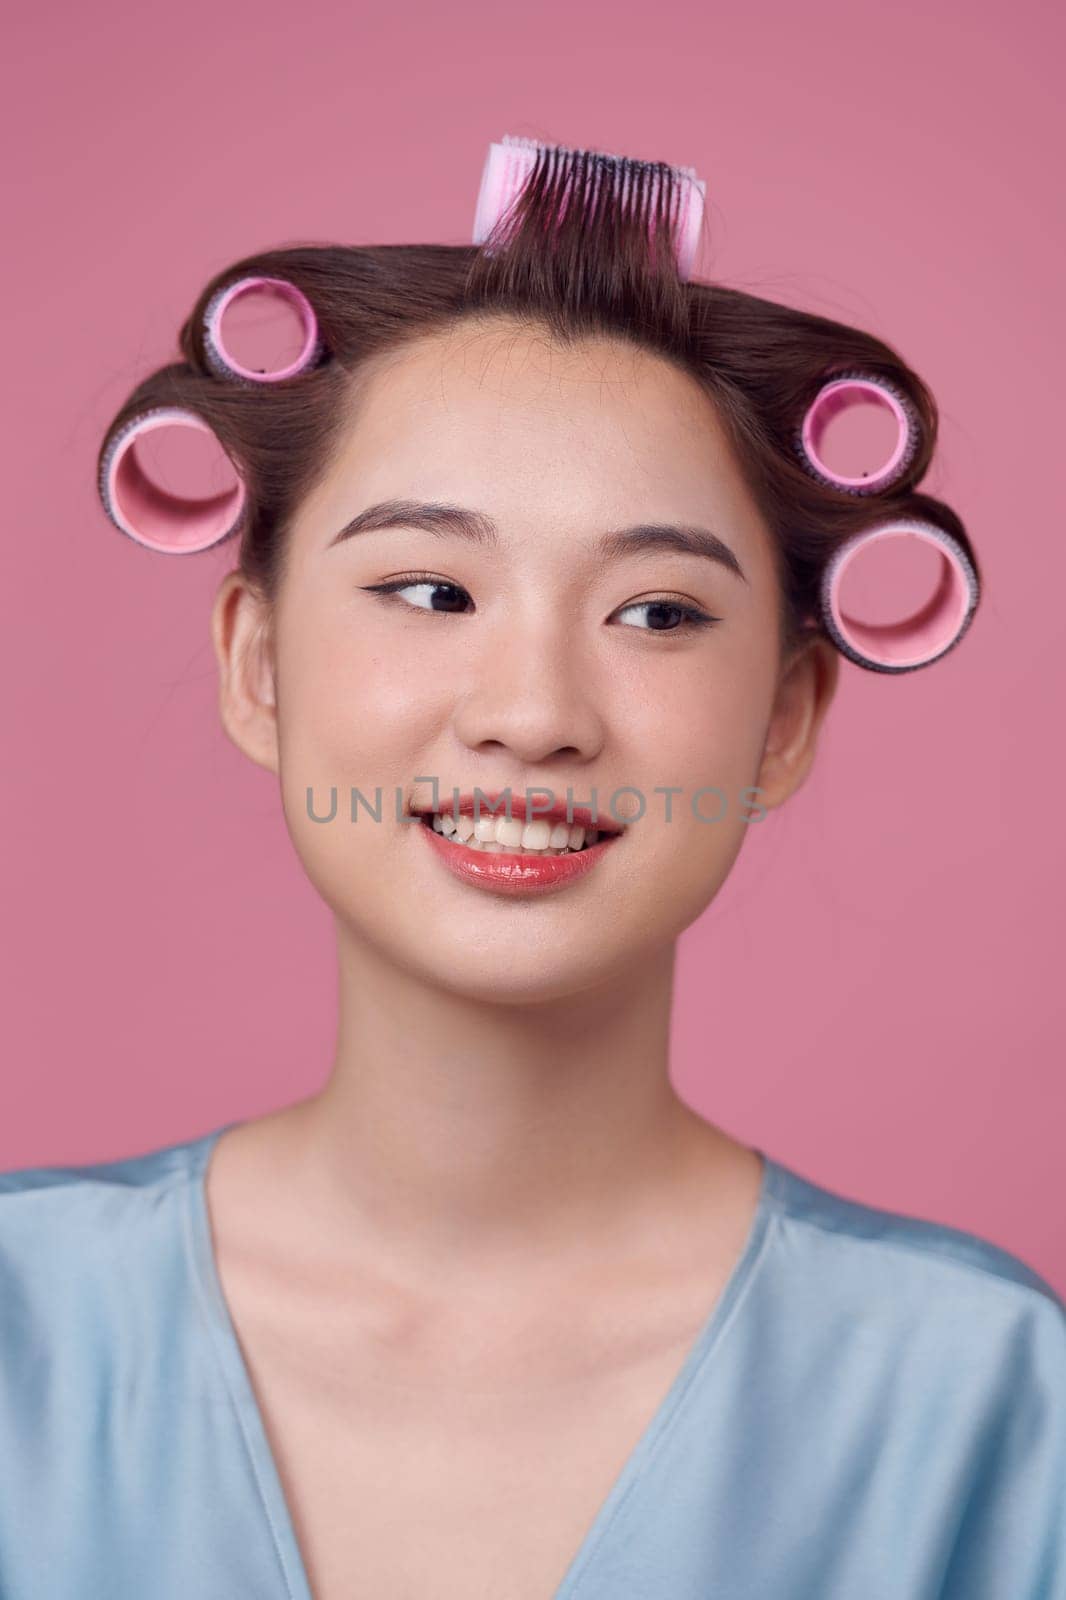 Happy young woman in blue dress and hair curlers on pink background